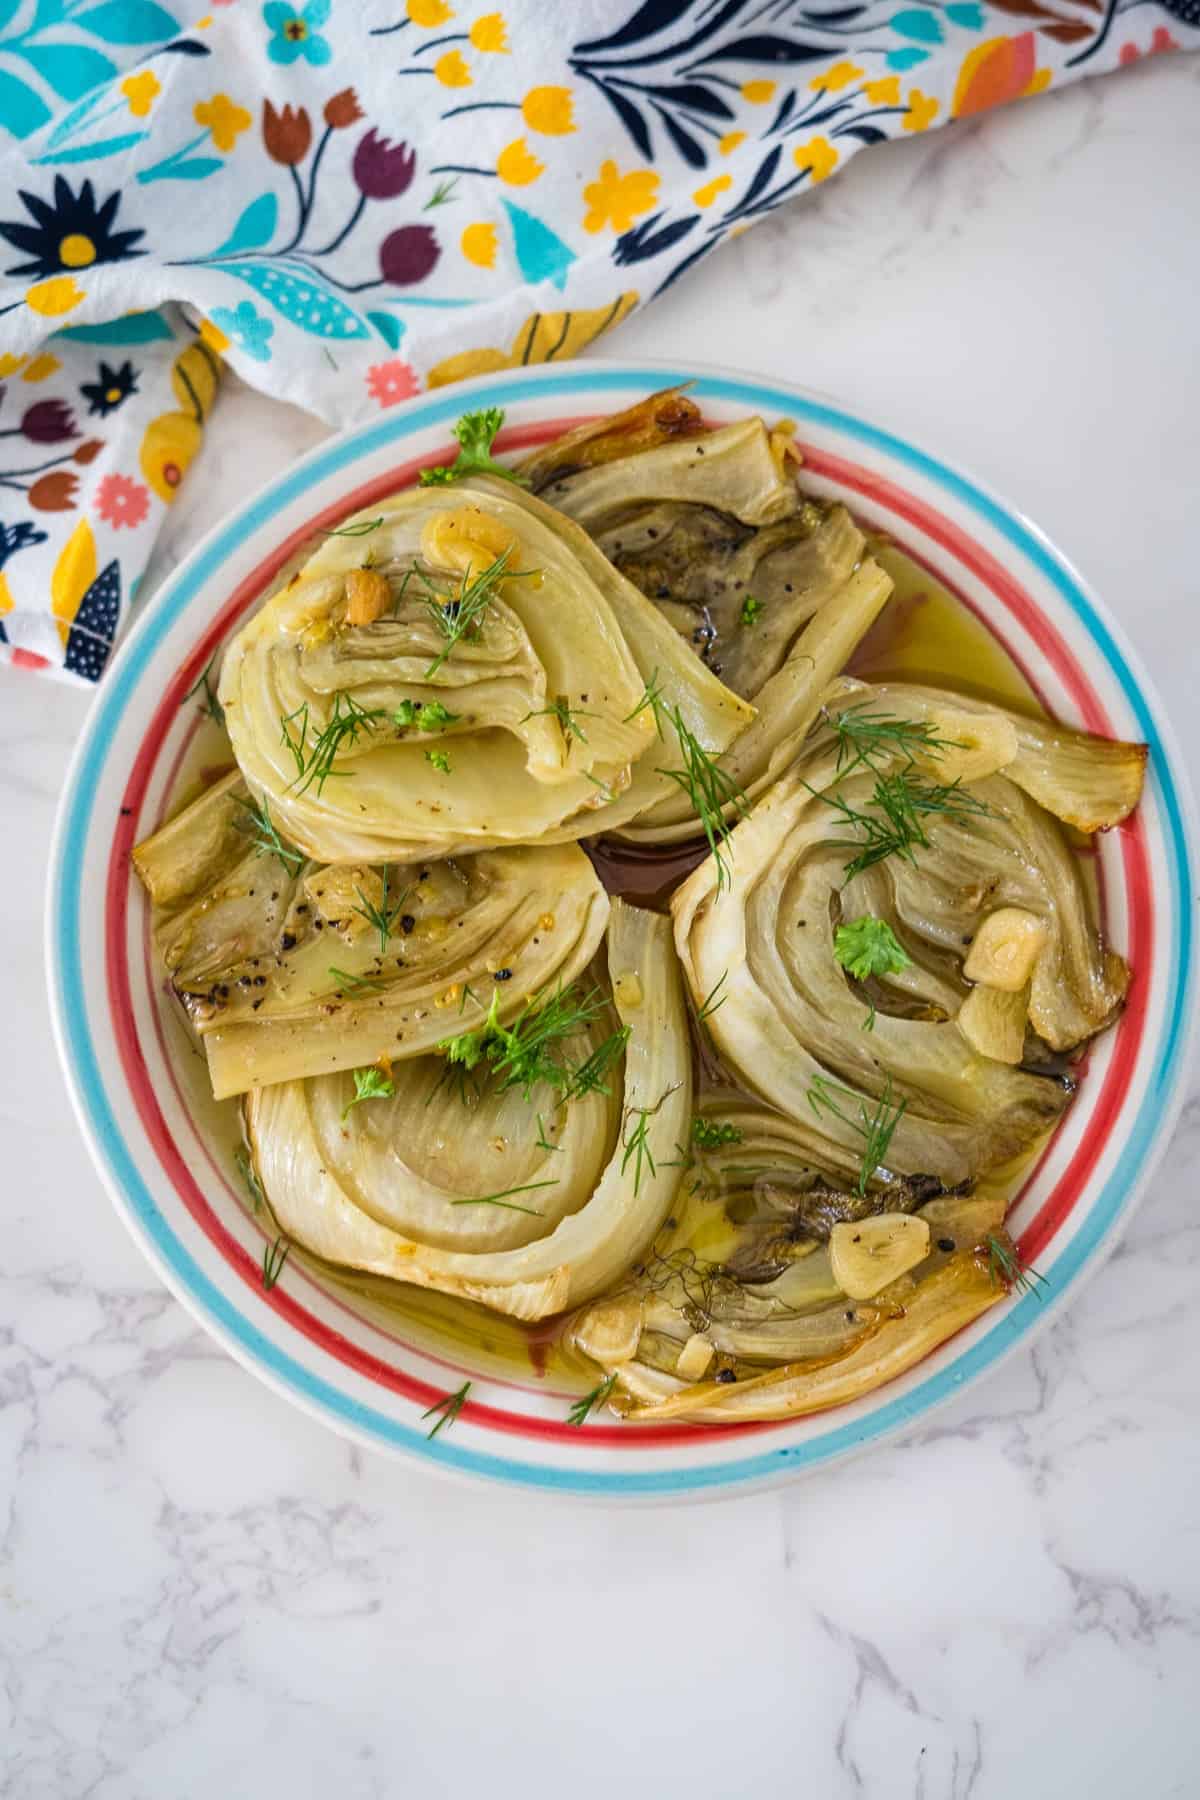 A plate of braised fennel halves garnished with herbs, pictured on a marble countertop next to a colorful cloth.